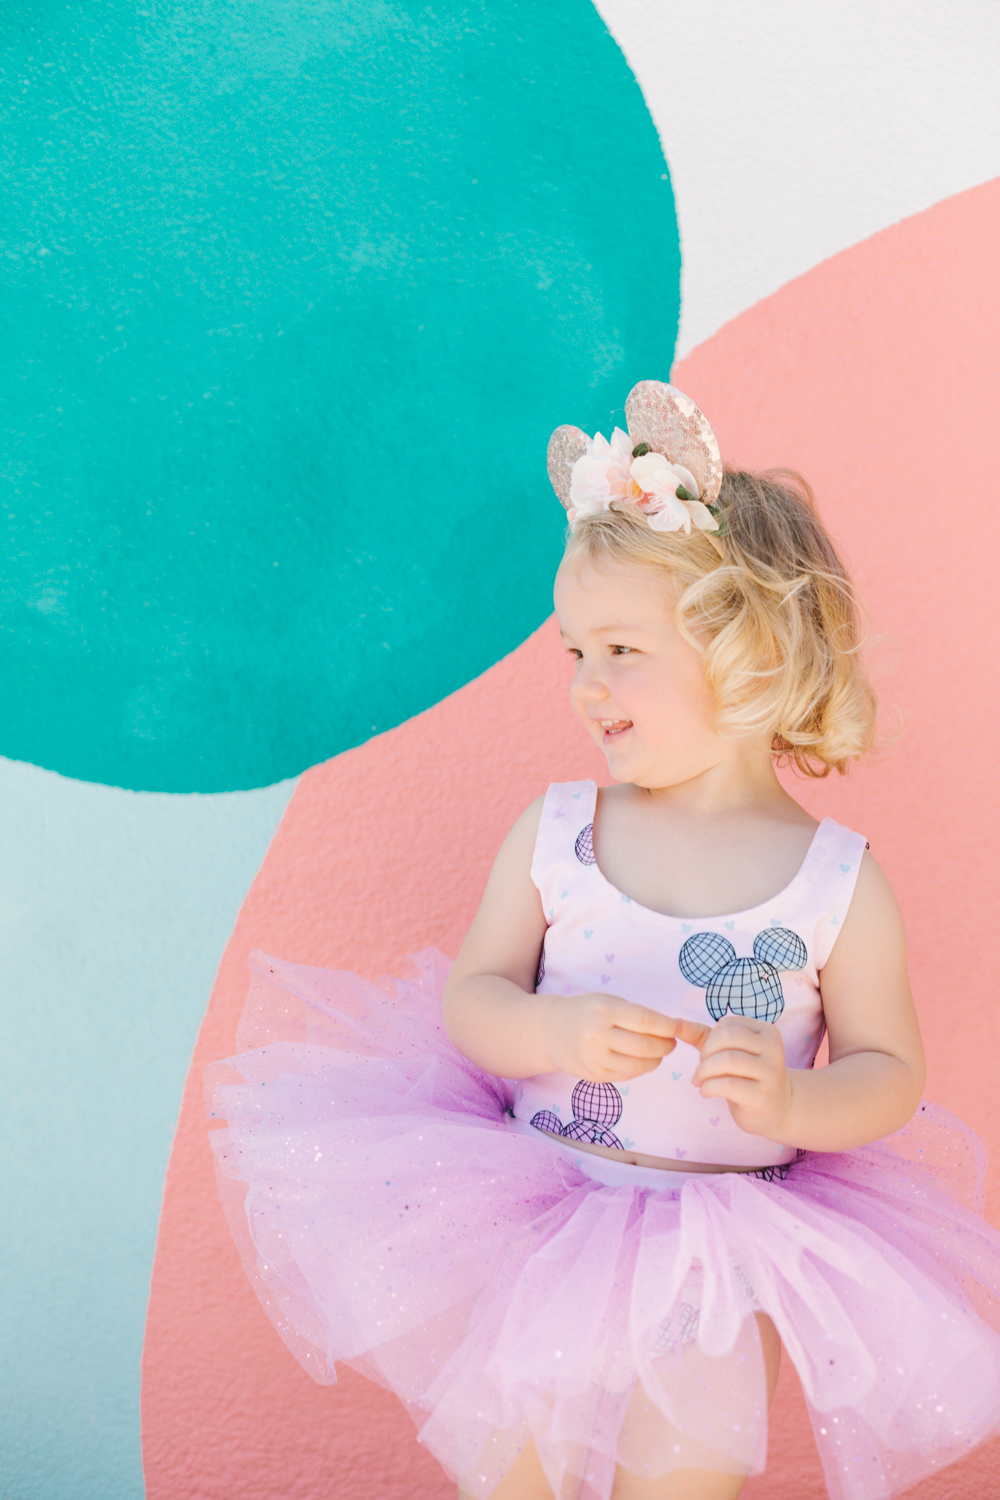 Disney Style – How to Dress your Littles at the Park